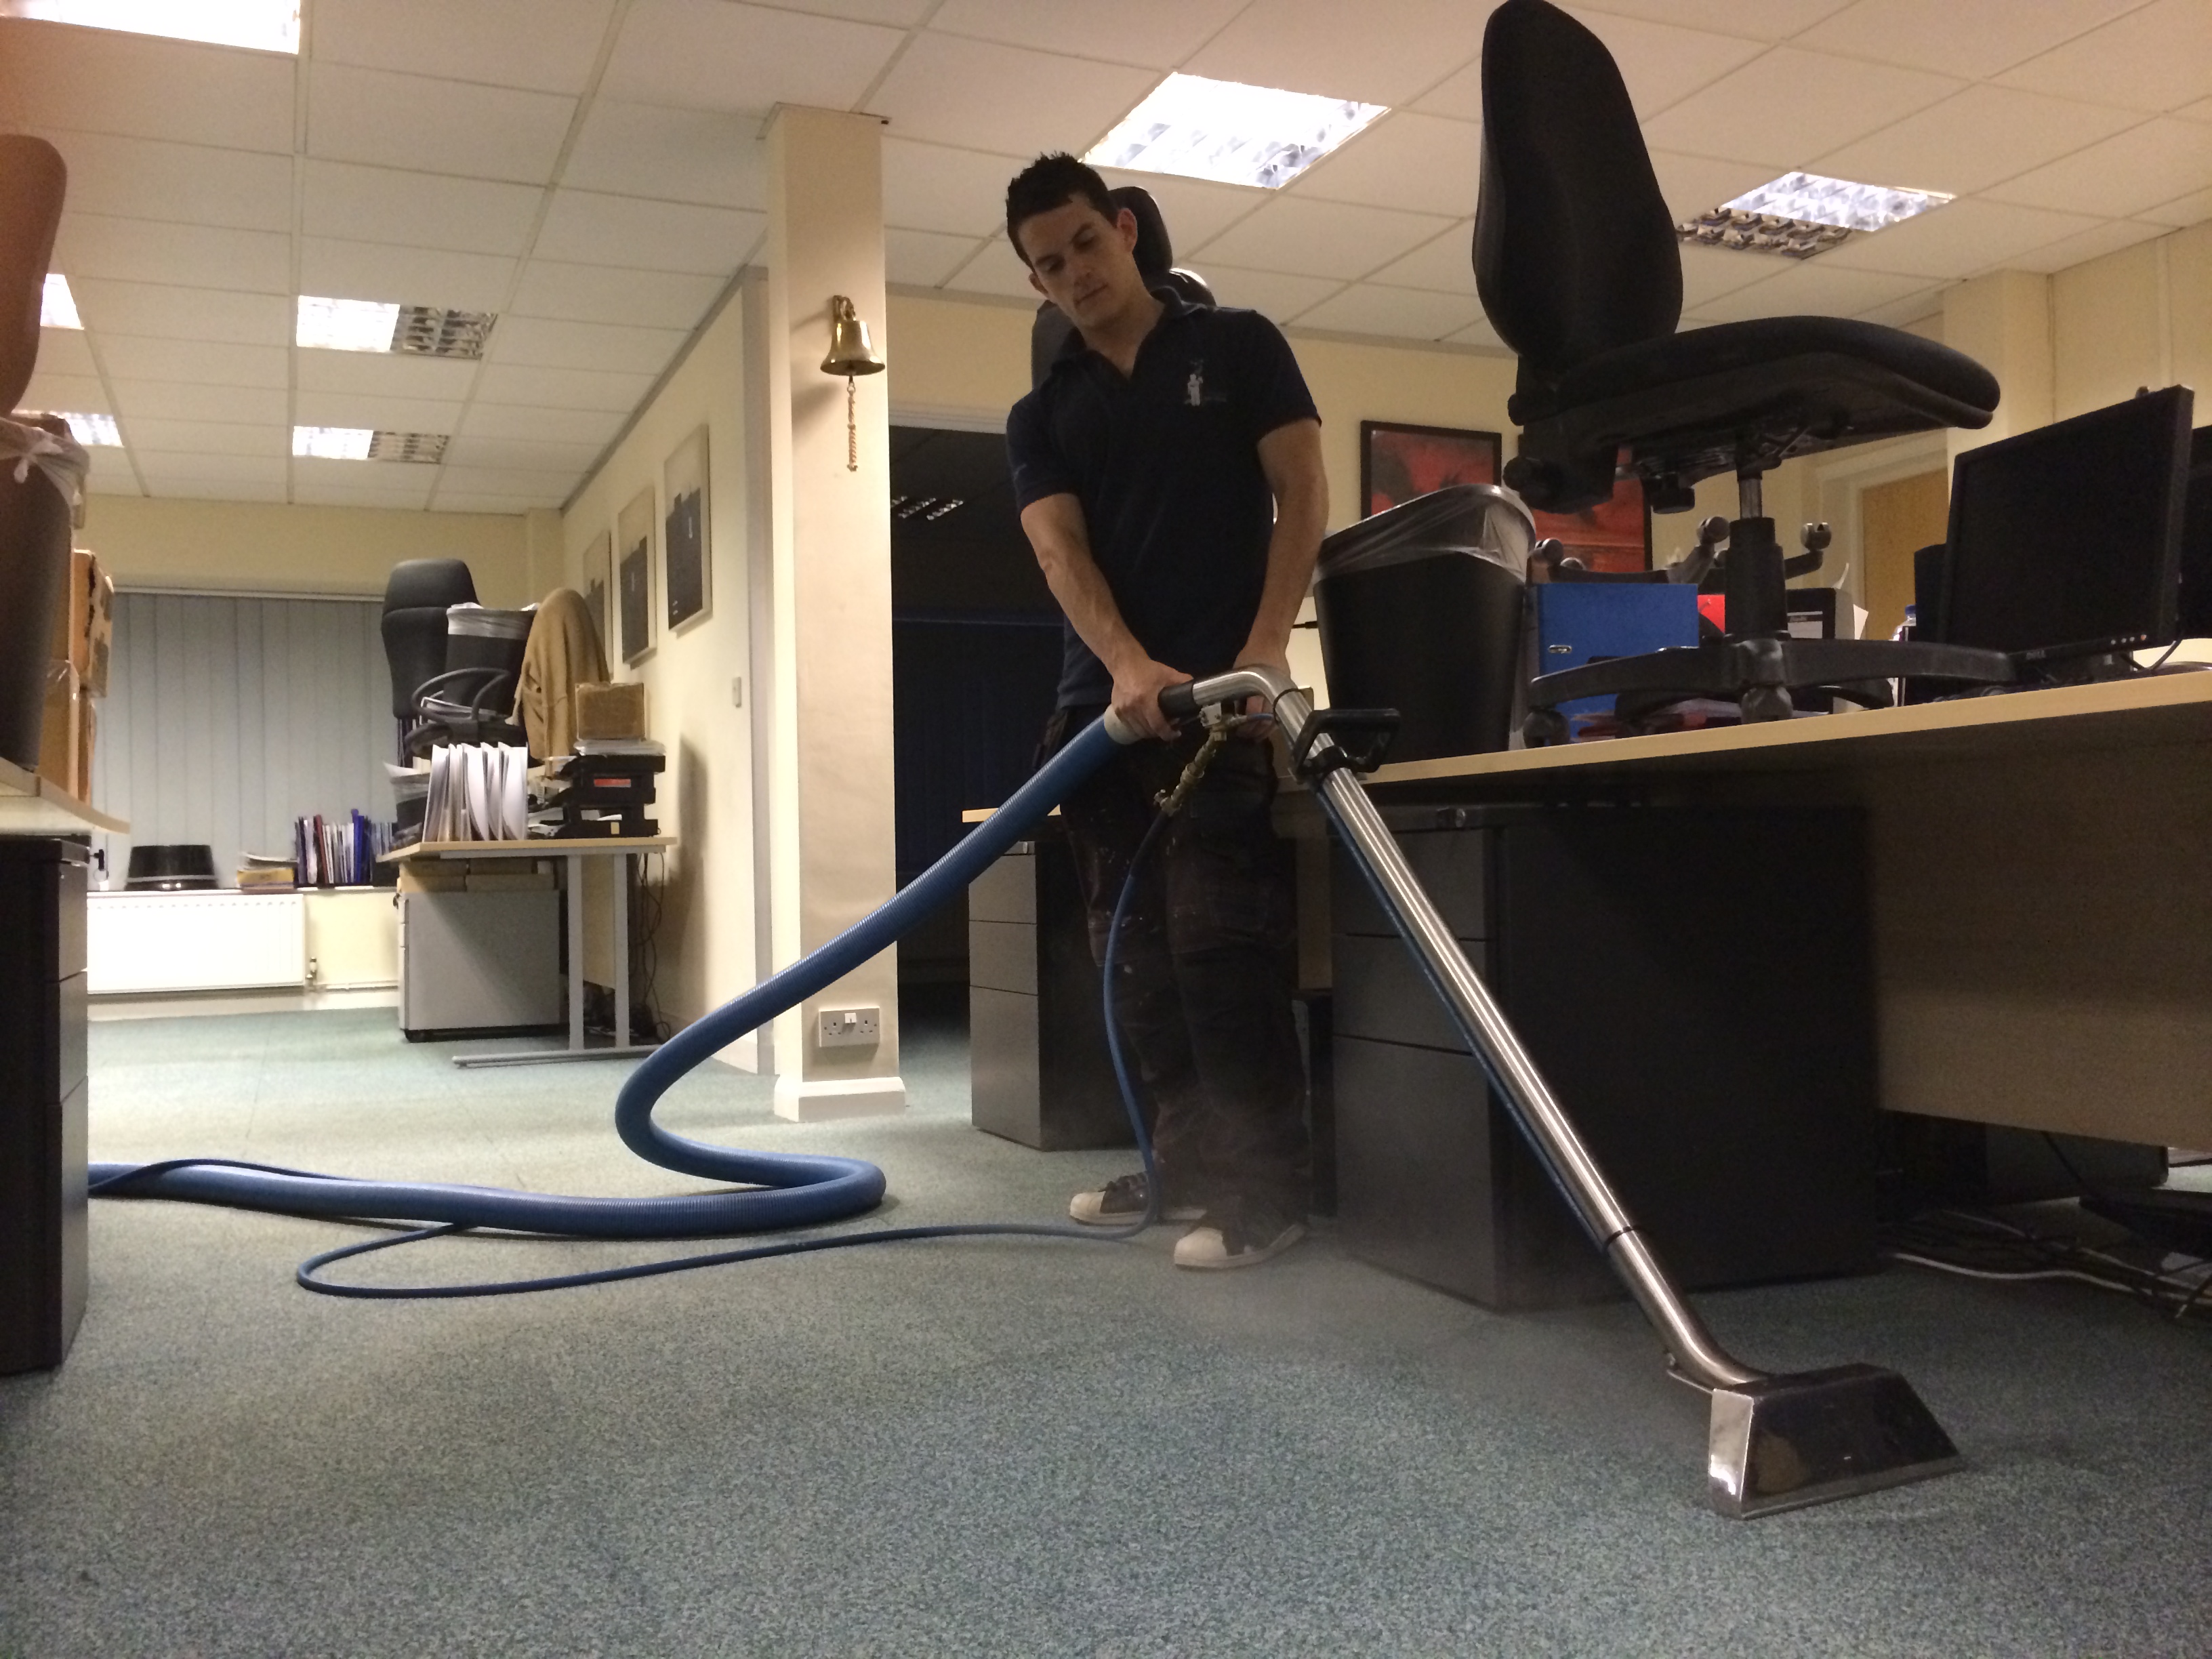 Best Office Cleaning Company Provides Finest Carpet Cleaning Service \u2013 Absolute Spotless 